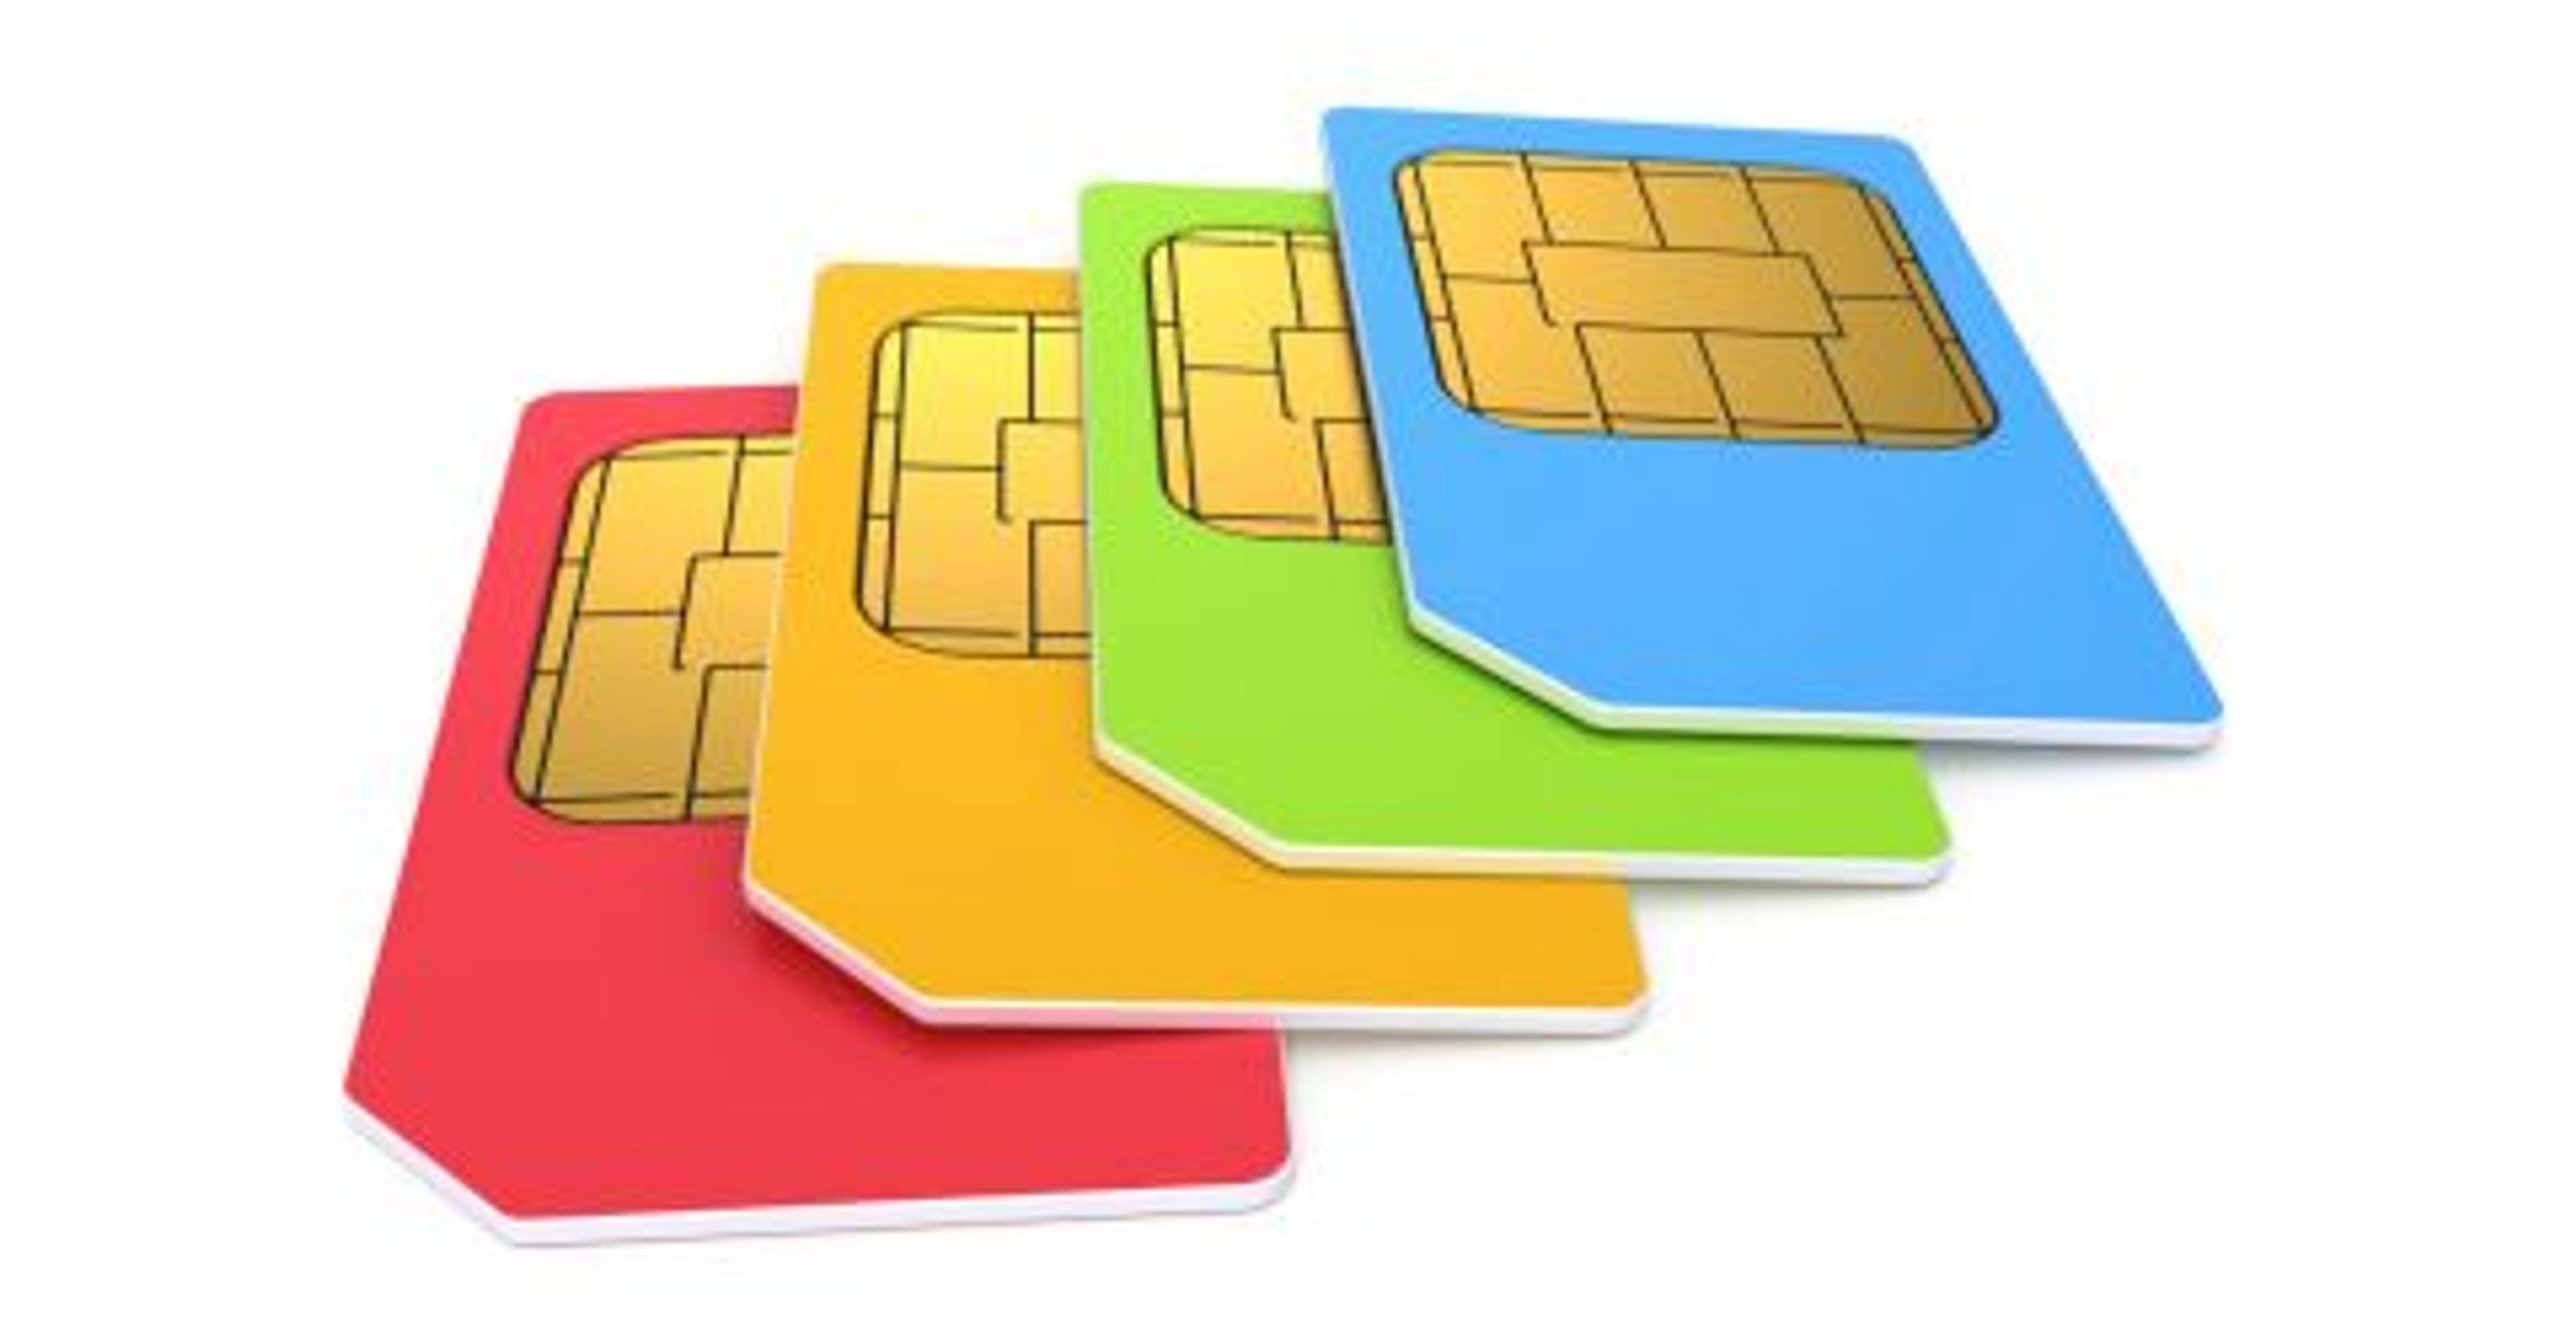 duration-of-sim-card-activity-what-you-need-to-know